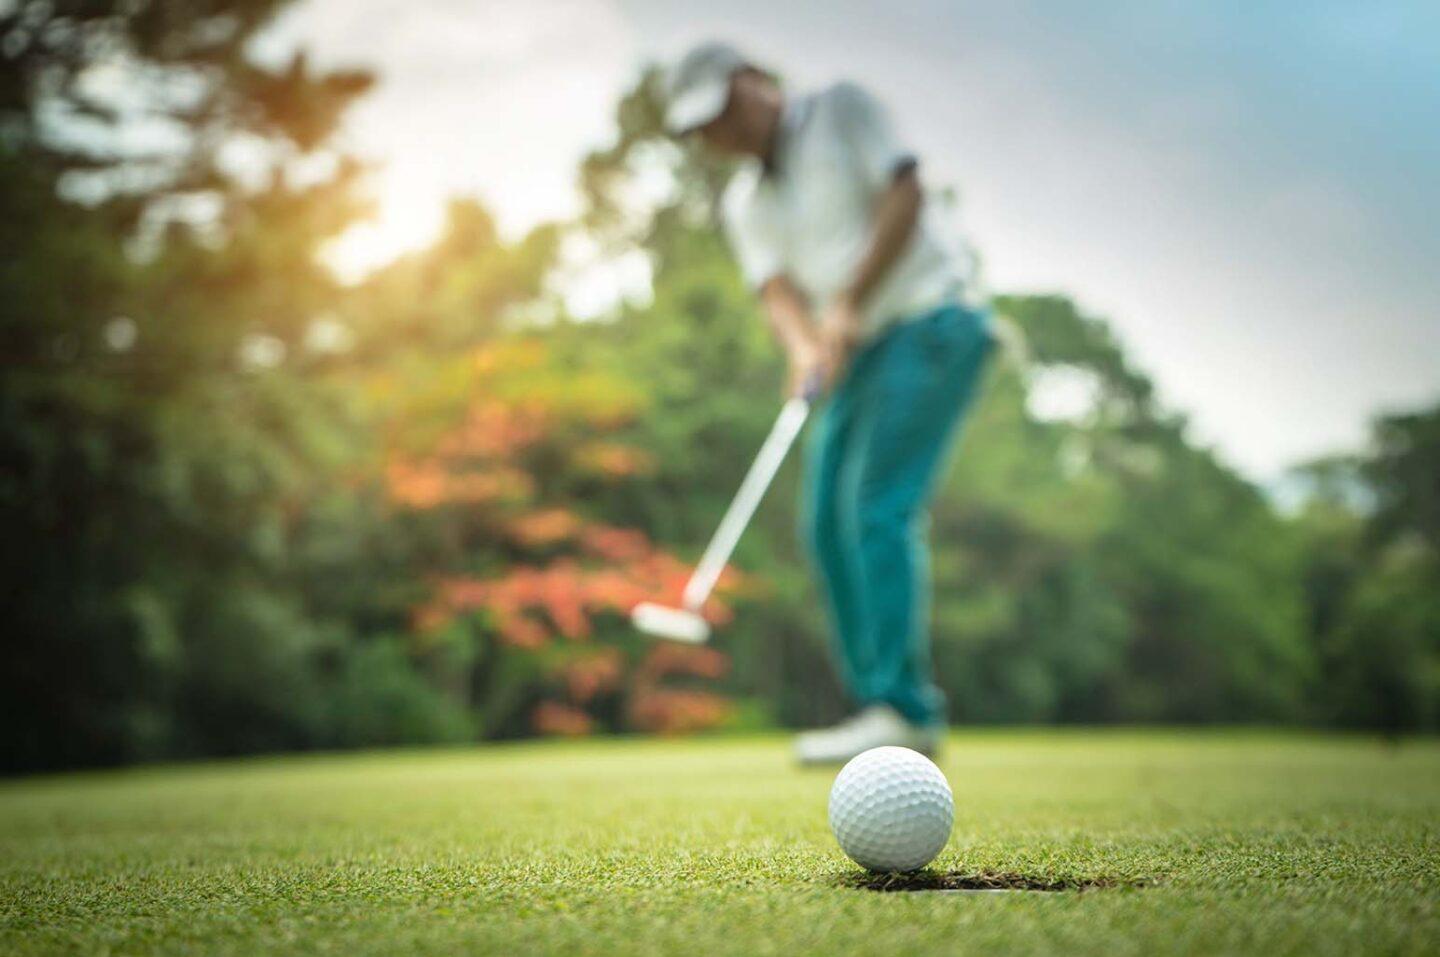 Golfing Etiquette 101: The Dos and Don’ts of the Golf Course